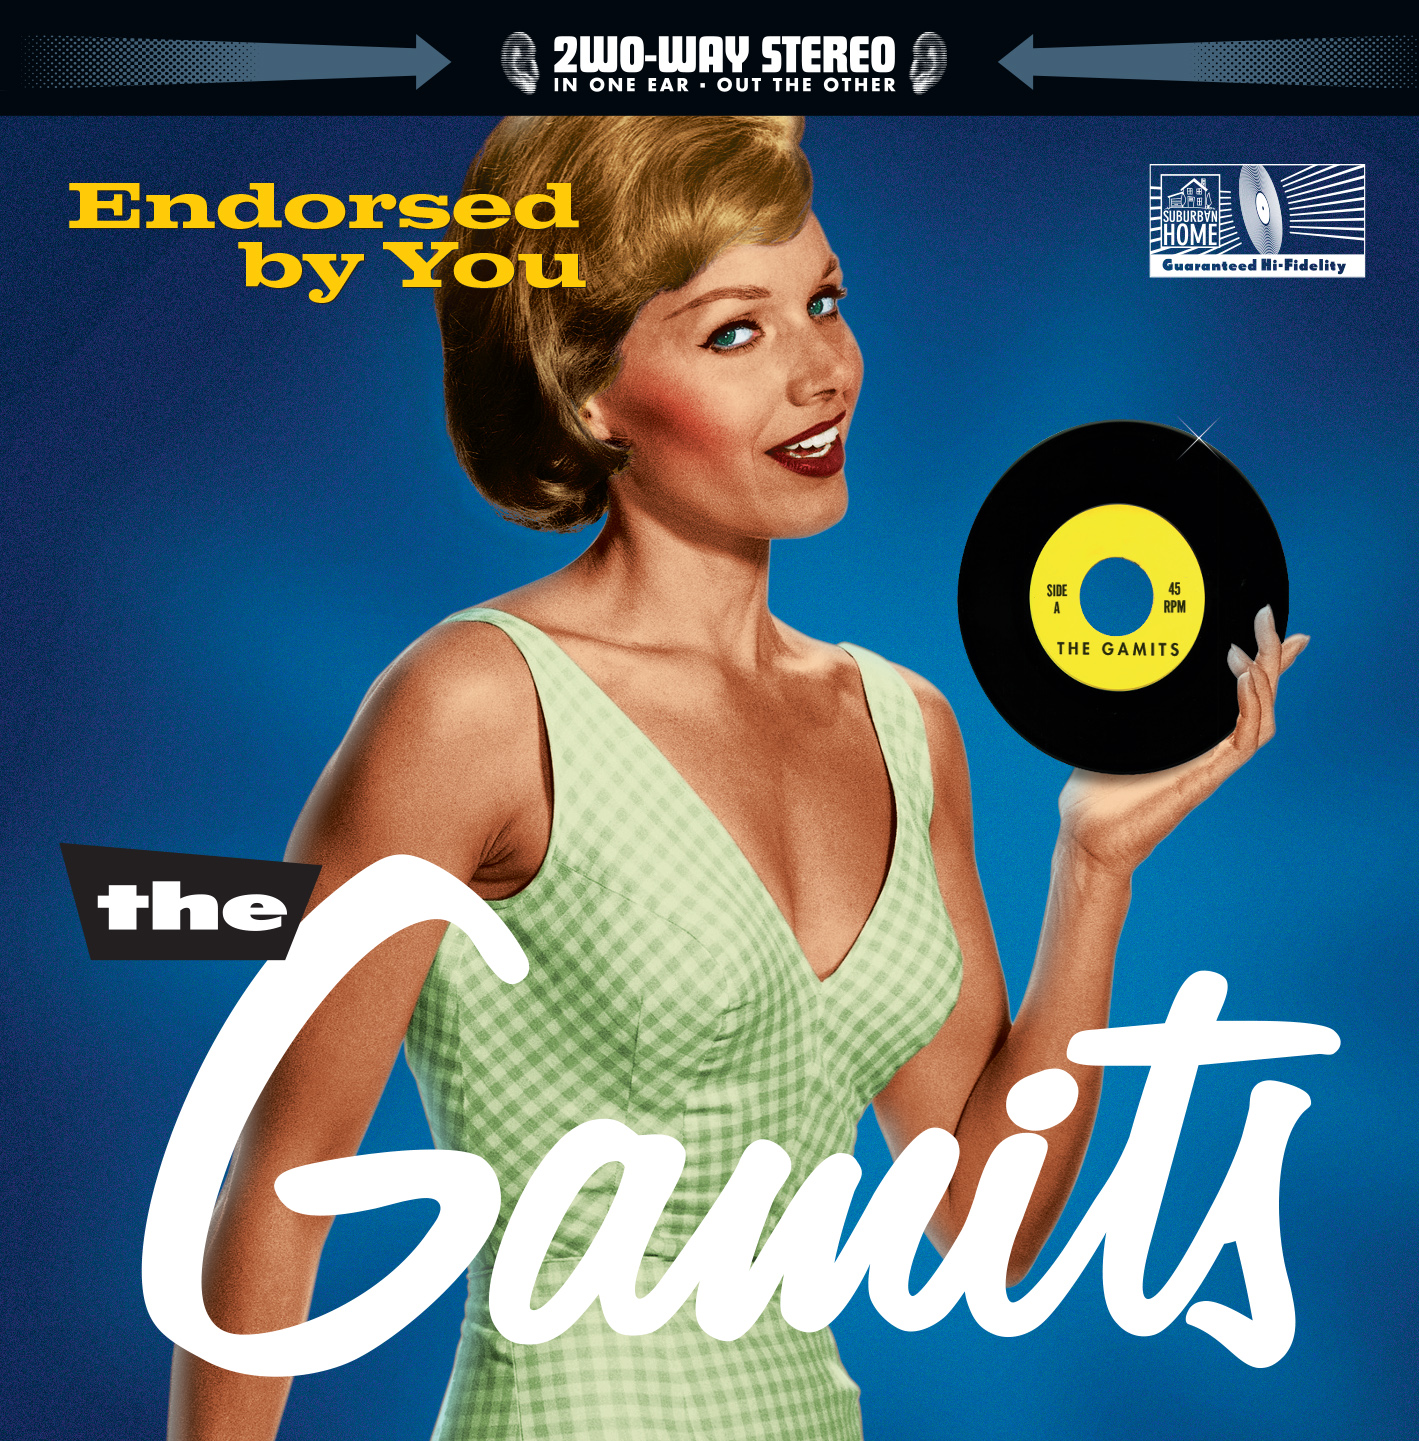 The Gamits - Endorsed by You CD cover